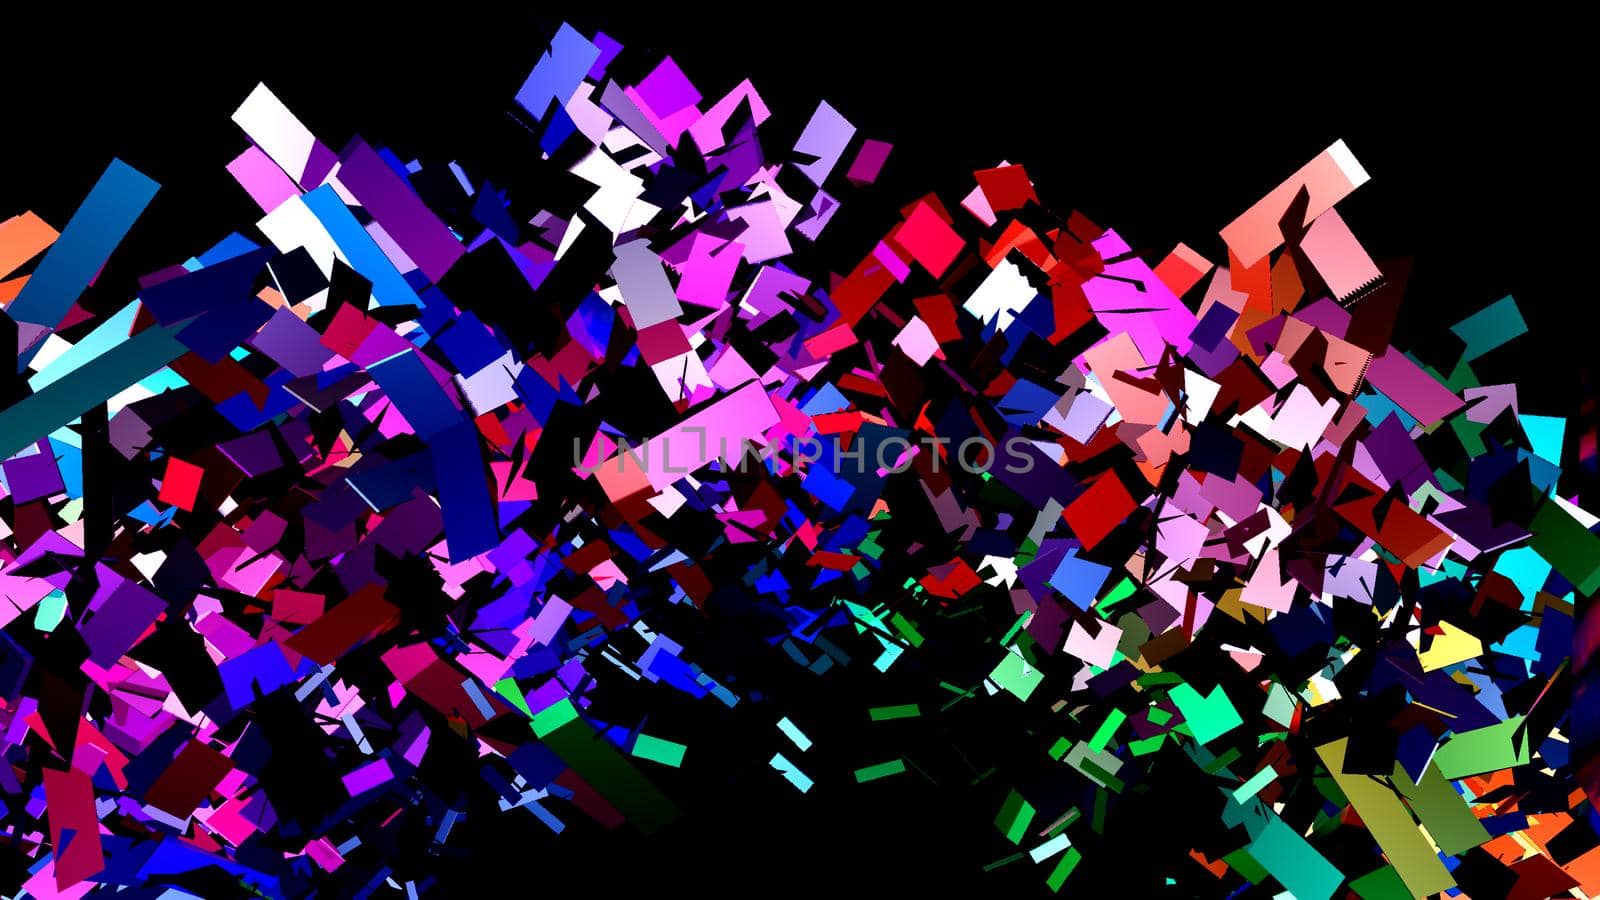 Abstract background with multicolored shapes by Vvicca